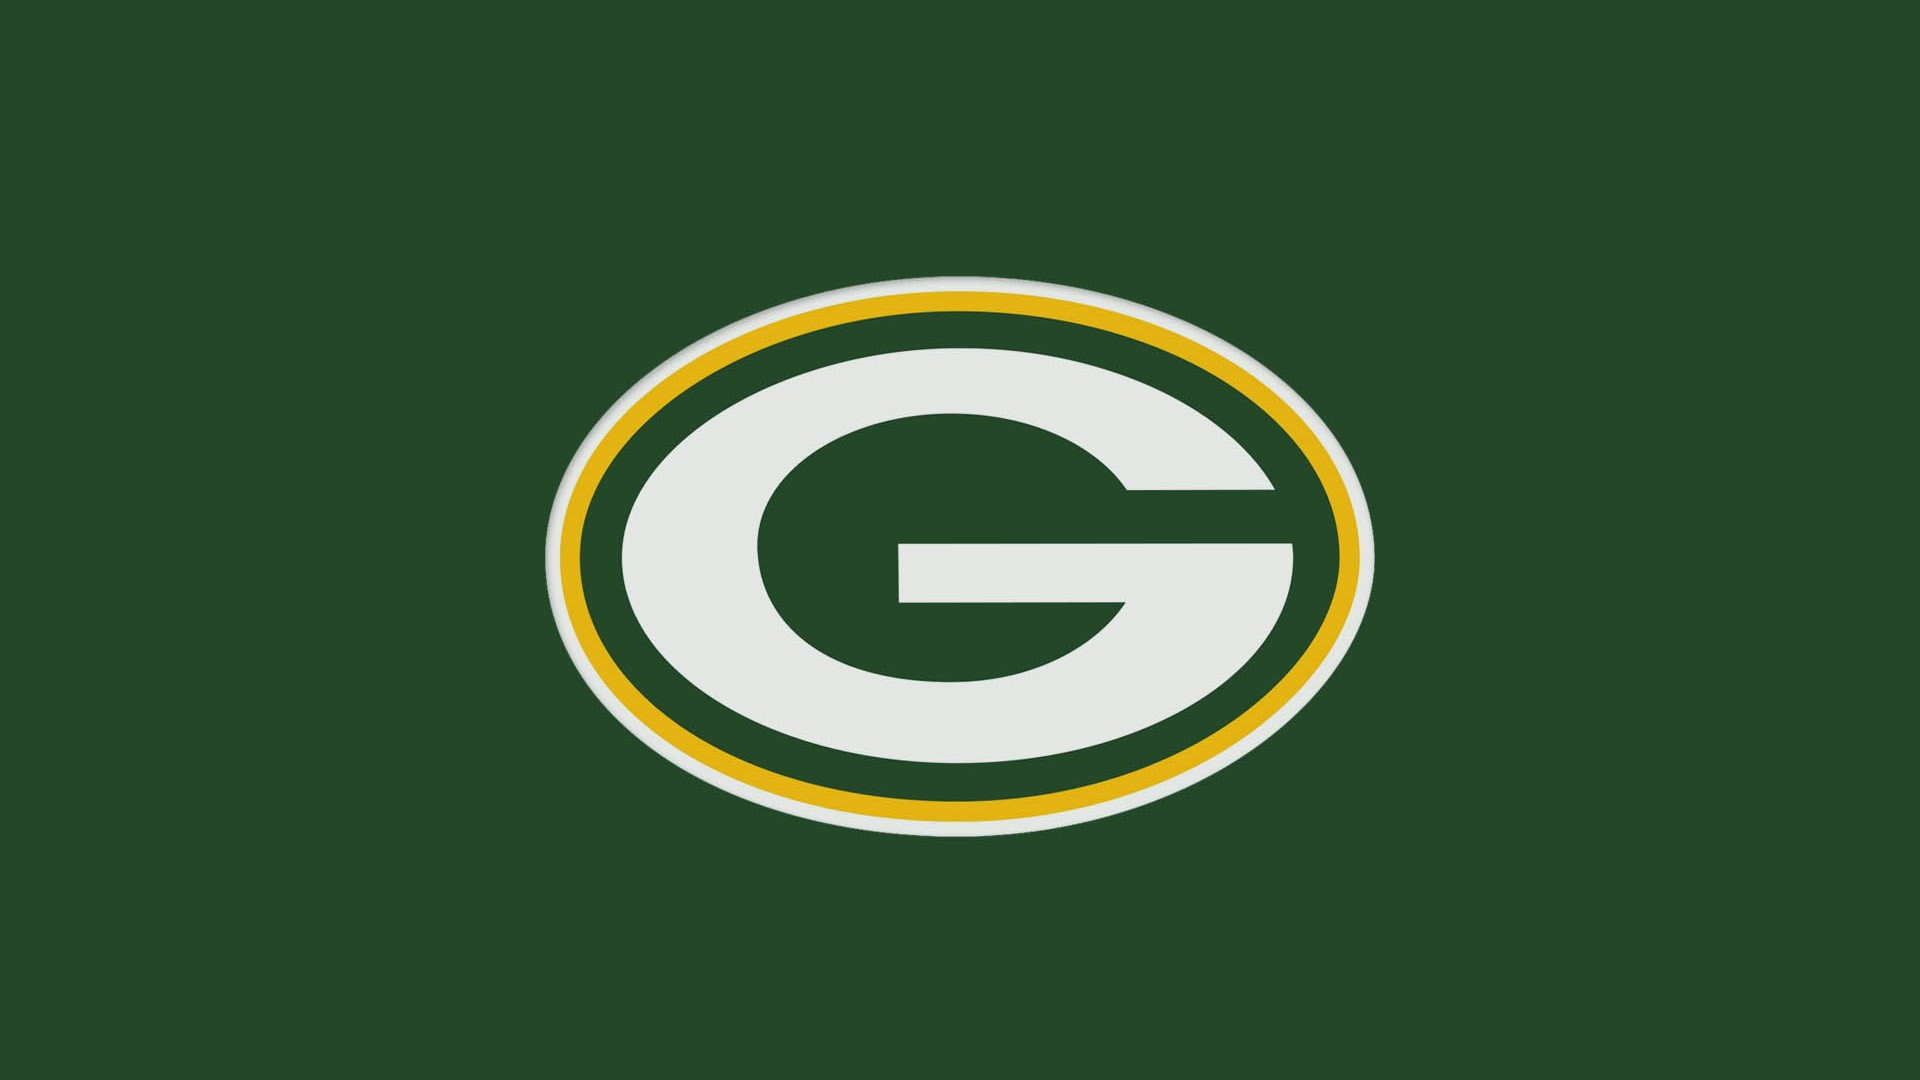 Green Bay Packers Wallpaper For Desktop with high-resolution 1920x1080 pixel. You can use and set as wallpaper for Notebook Screensavers, Mac Wallpapers, Mobile Home Screen, iPhone or Android Phones Lock Screen